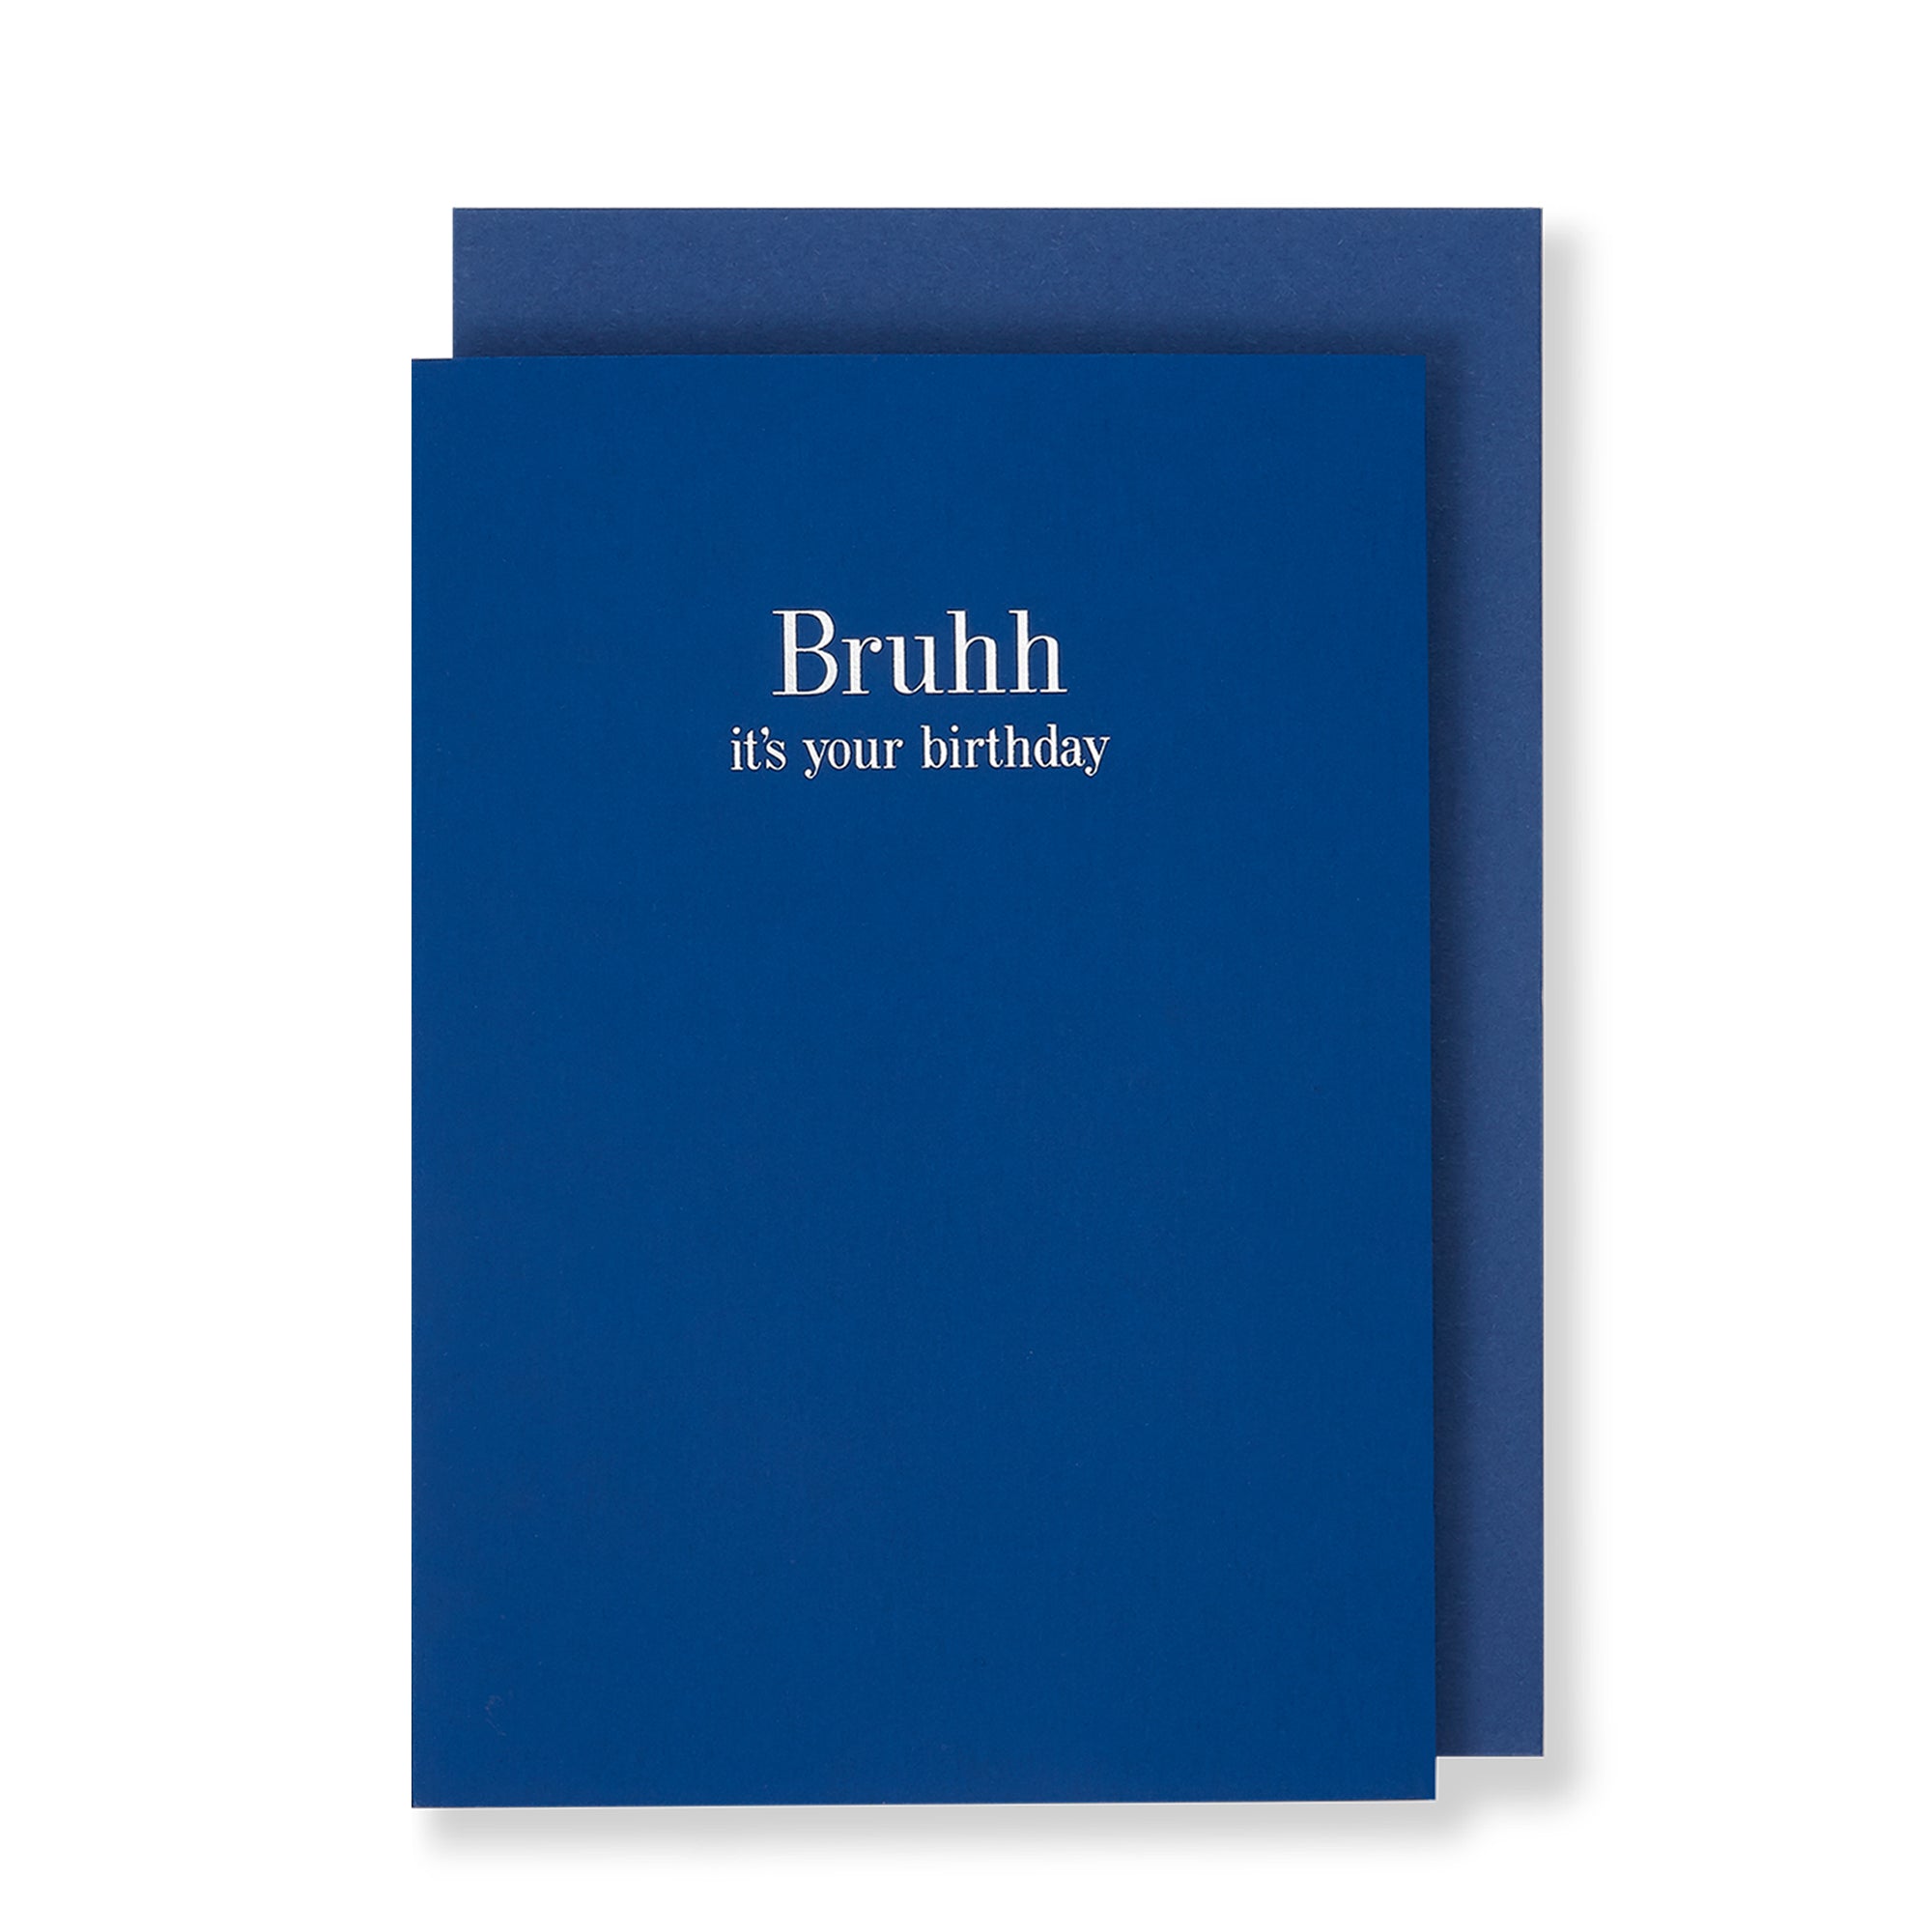 Bruhh It's Your Birthday Greeting Card in Royal Blue, Front